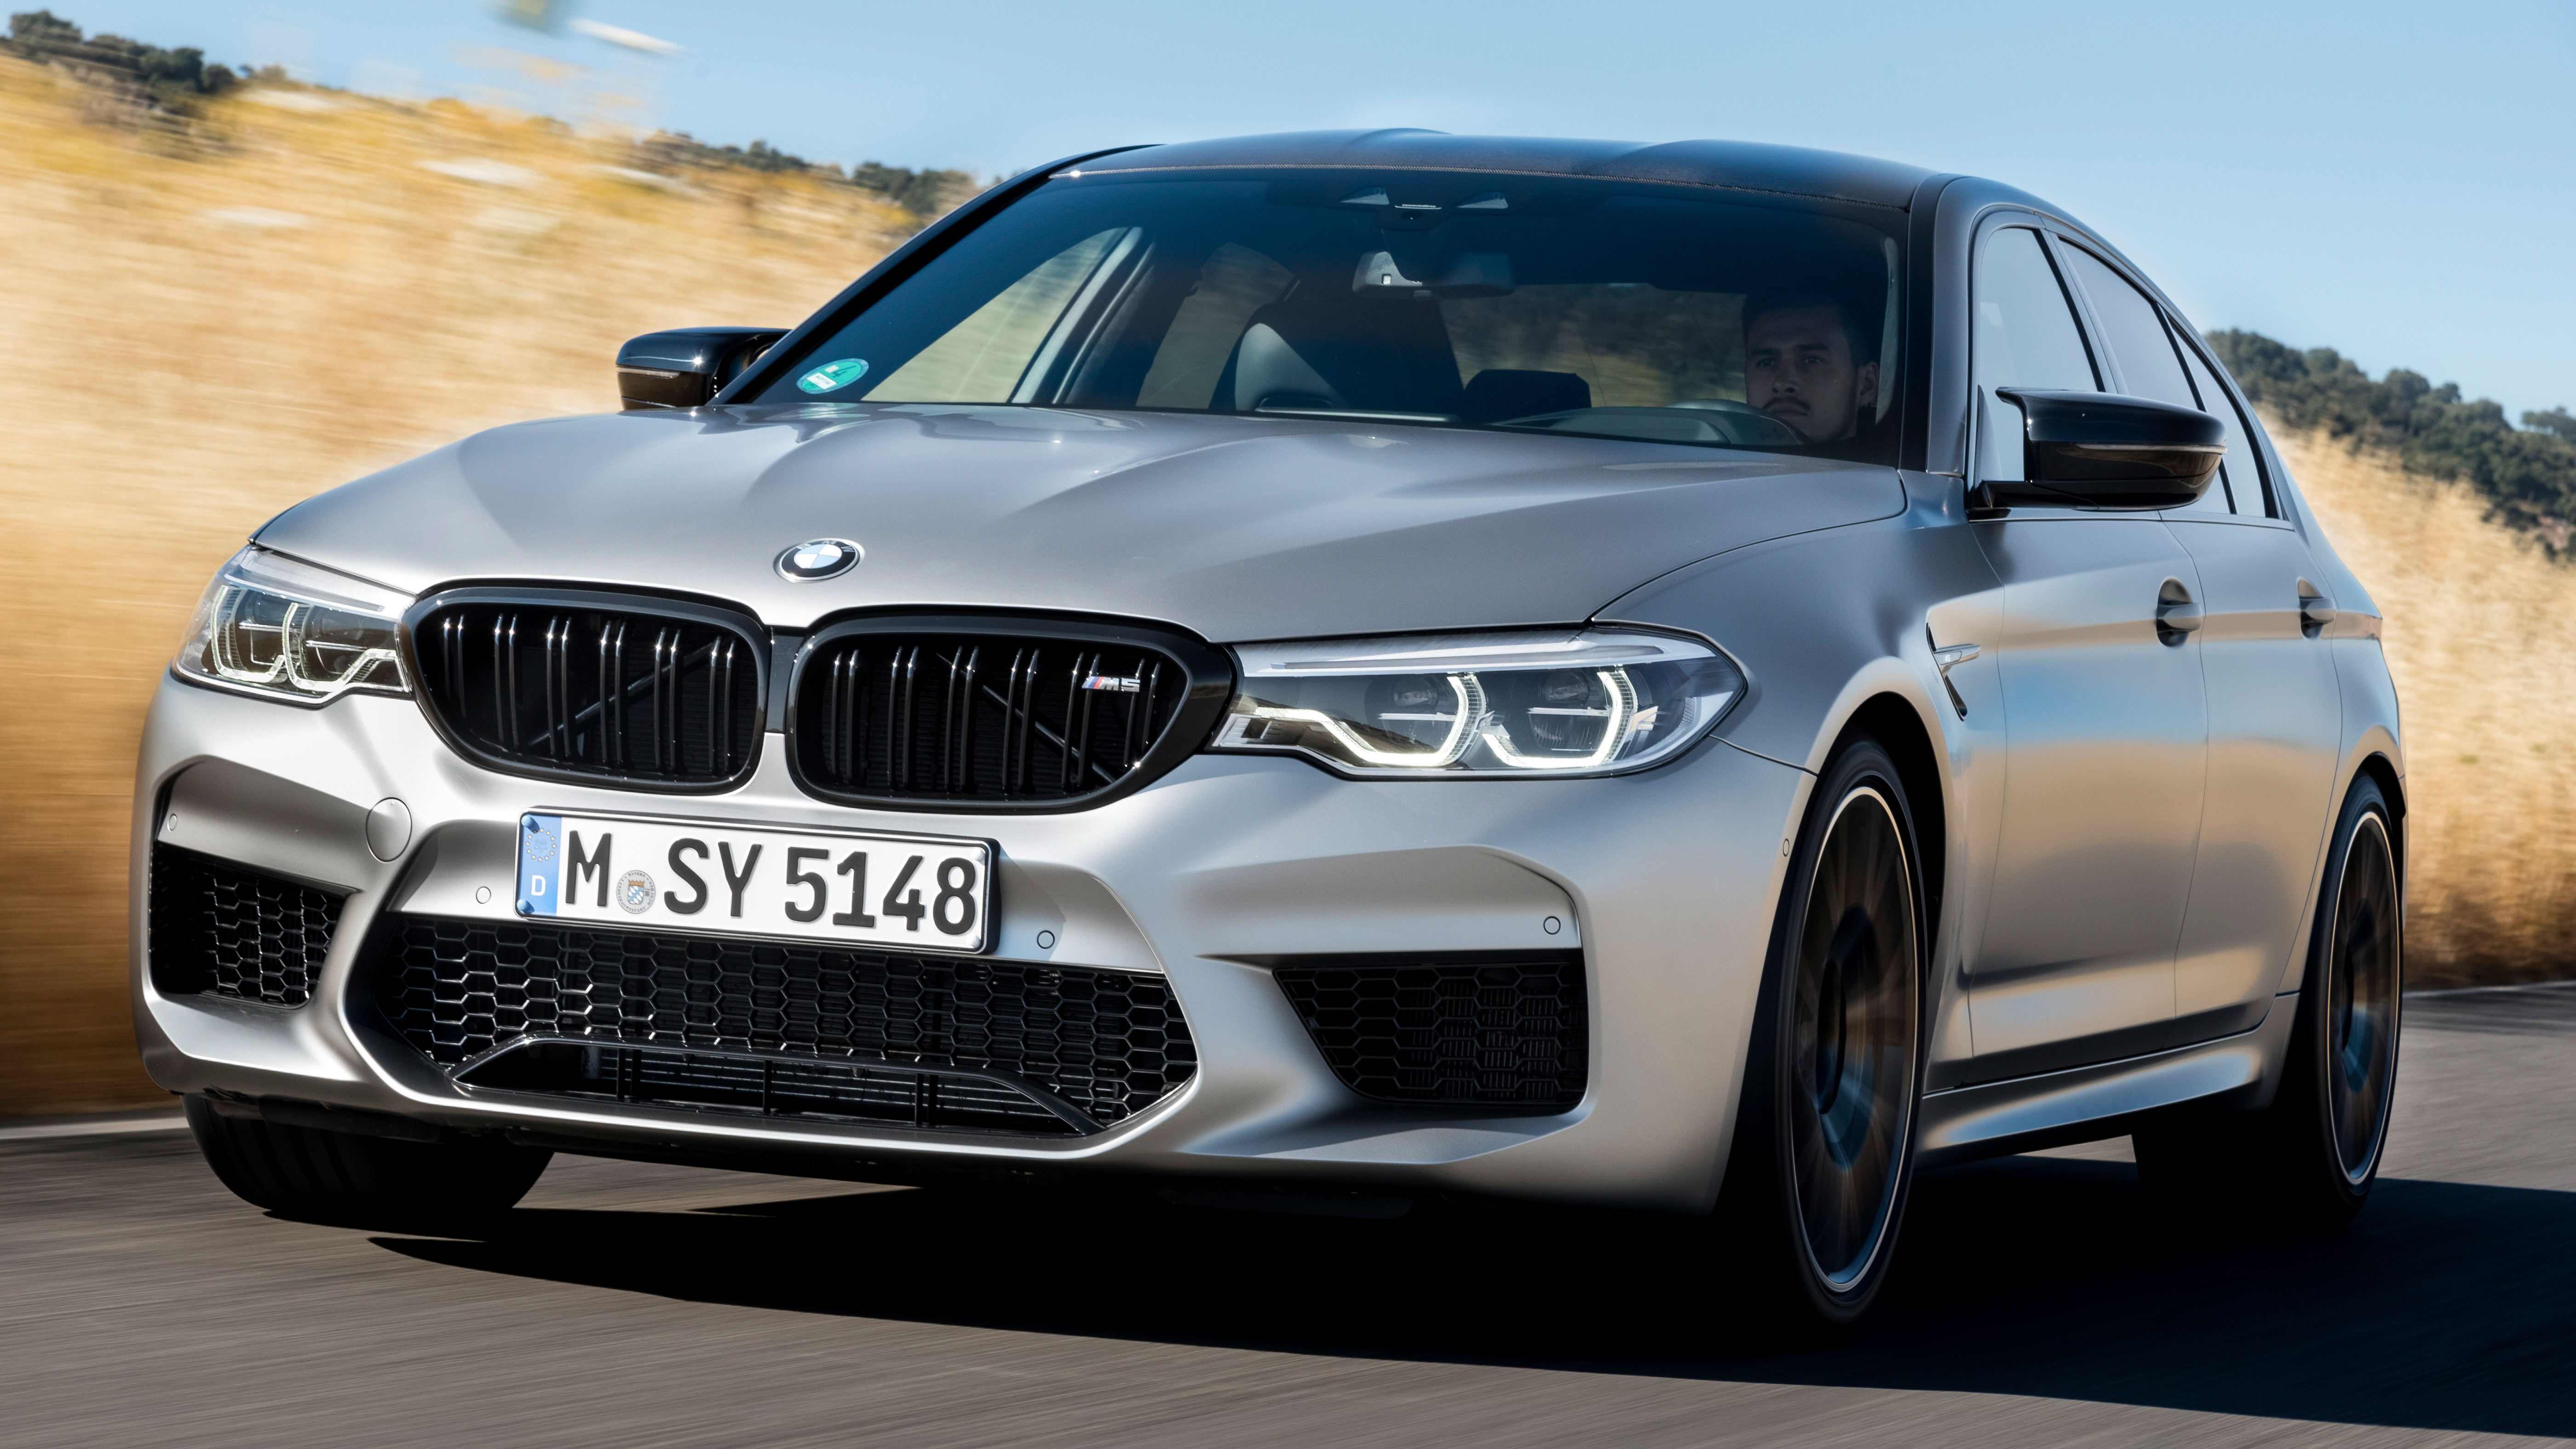 Бмв м5 competition. BMW m5 f90 Competition. BMW m5 Competition 2019. BMW m5 f90 2019. BMW m5 Competition 2018.